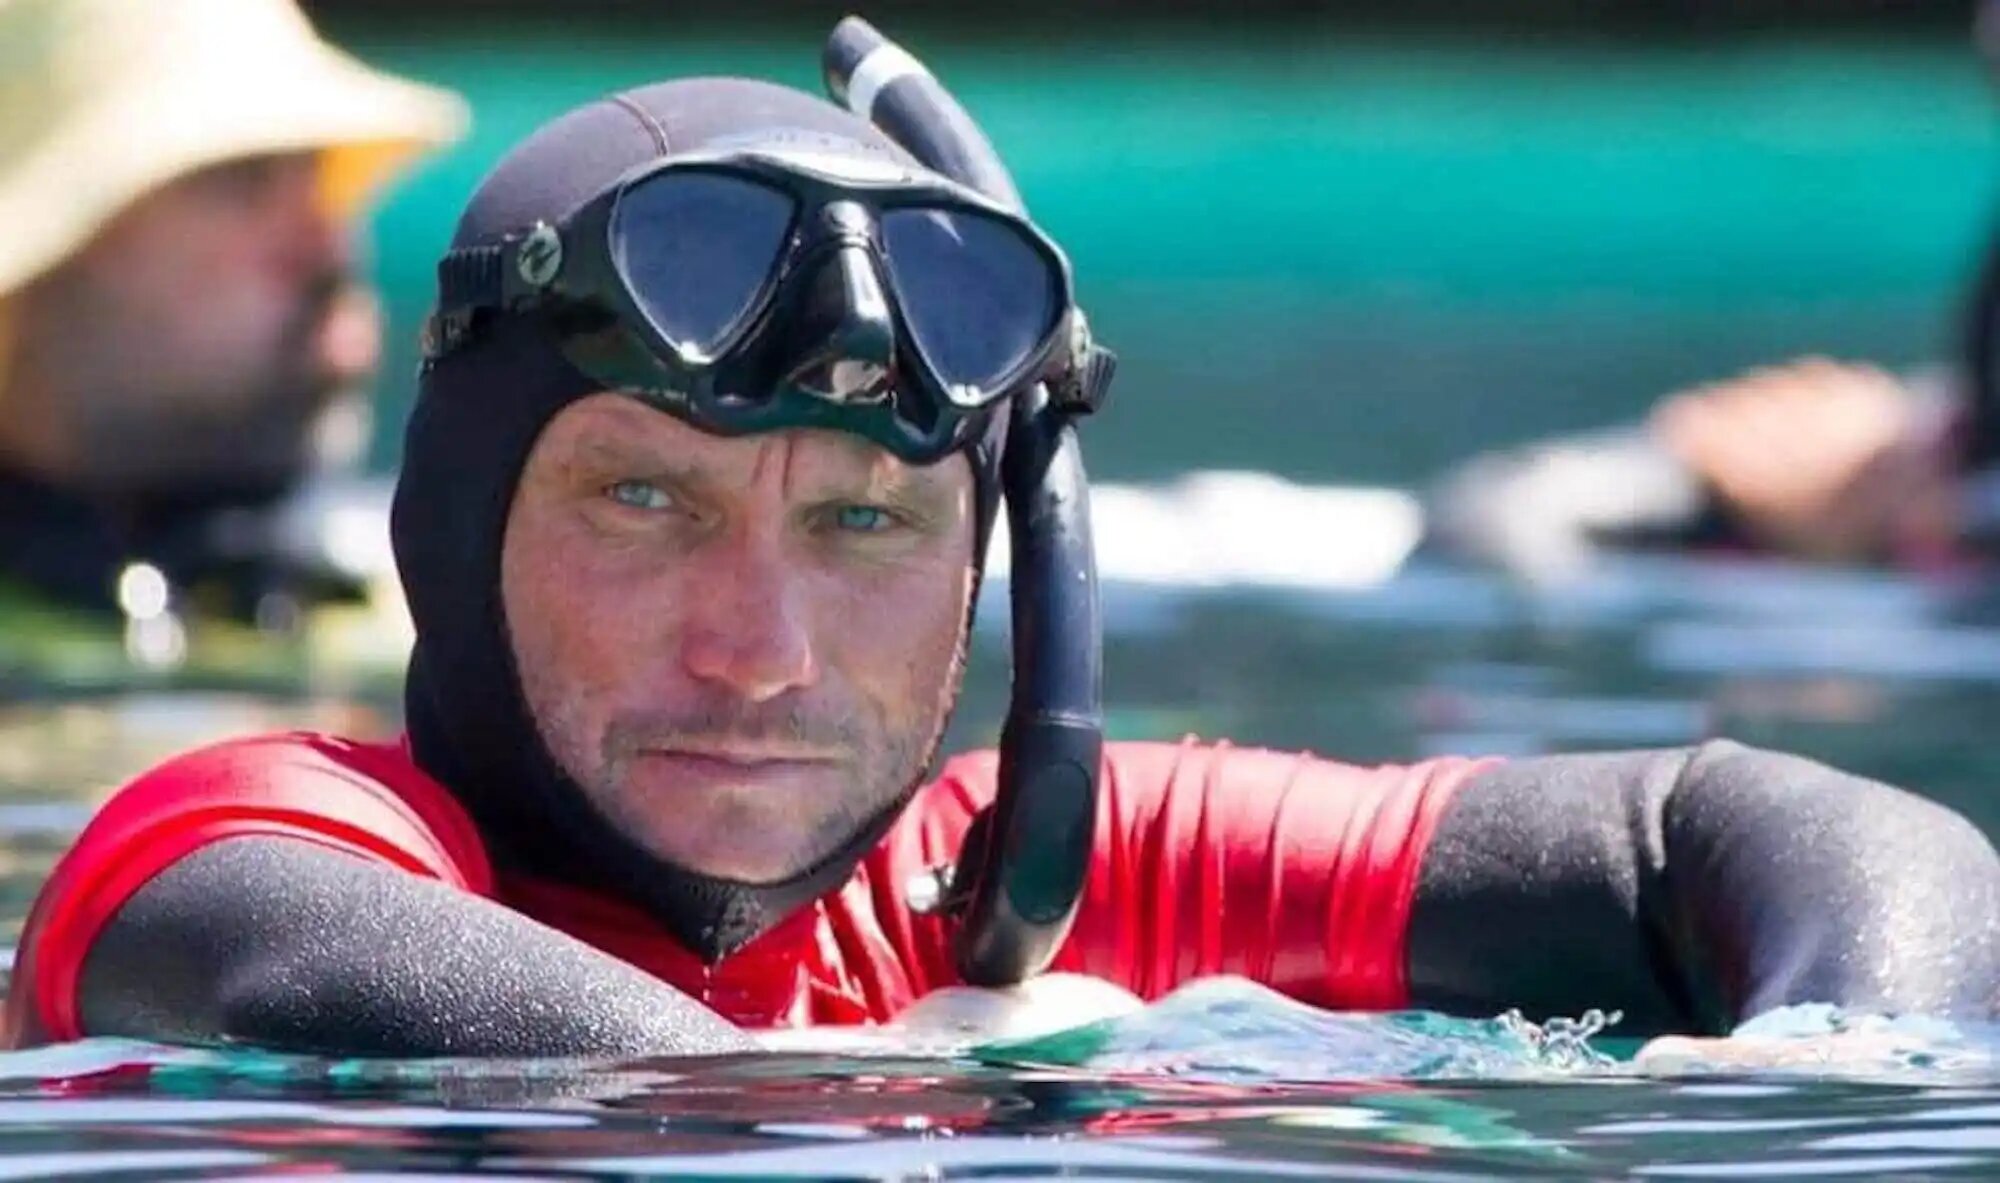 What happened to diver Stephen Keenan? Explained